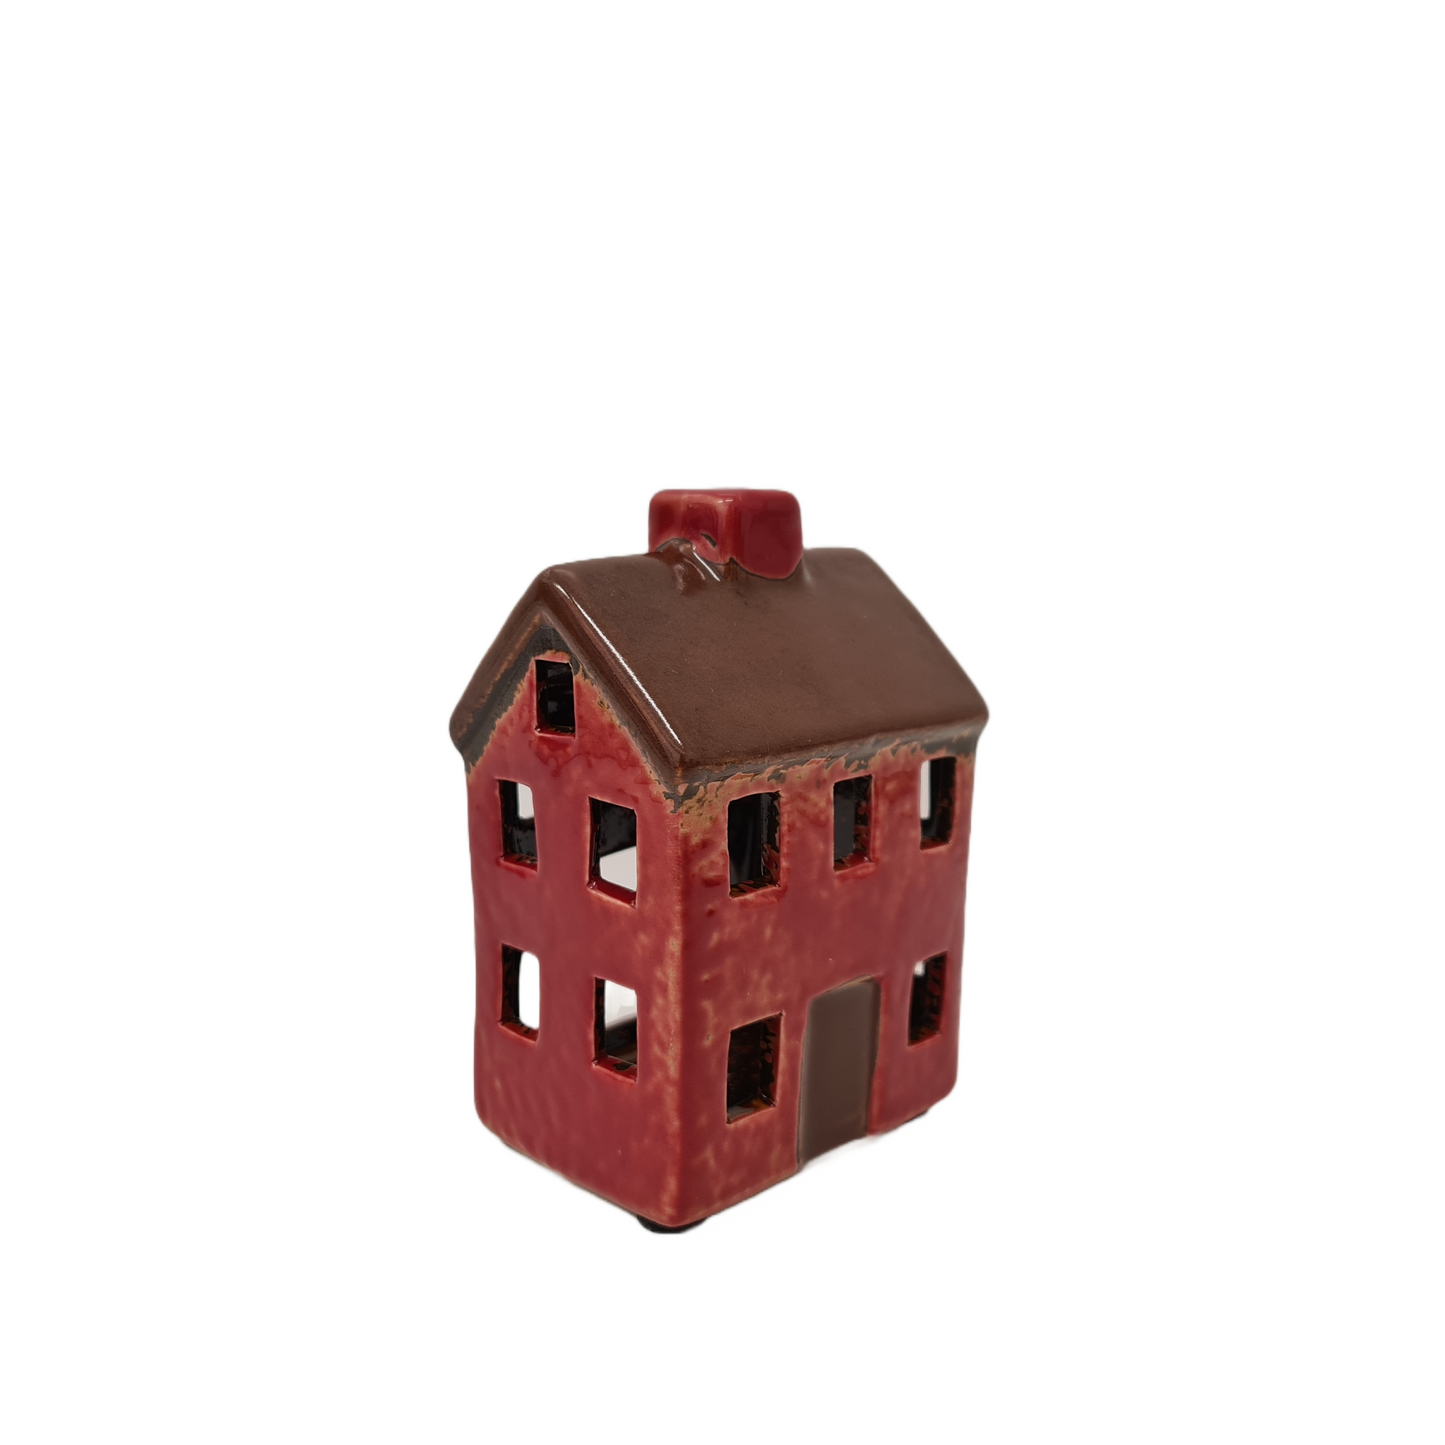 Alsace Petite Tea Light House - Red & Brown | French Country